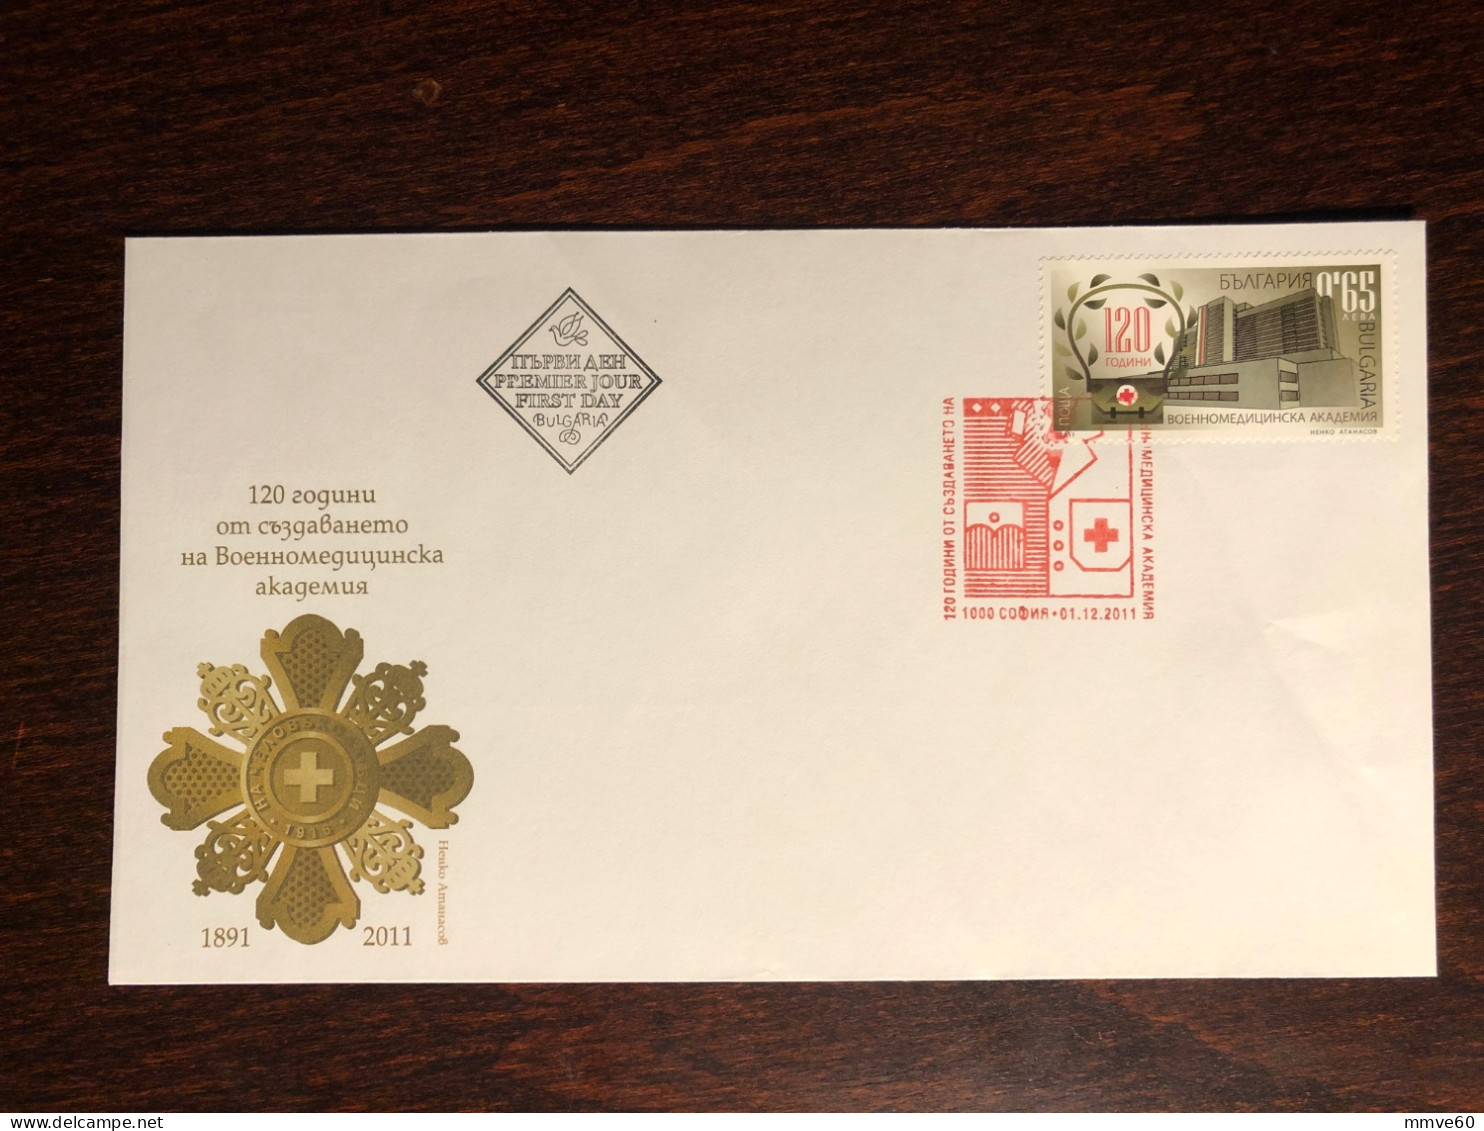 BULGARIA FDC COVER 2011 YEAR MEDICAL MILITARY ACADEMY HEALTH MEDICINE STAMP - Lettres & Documents